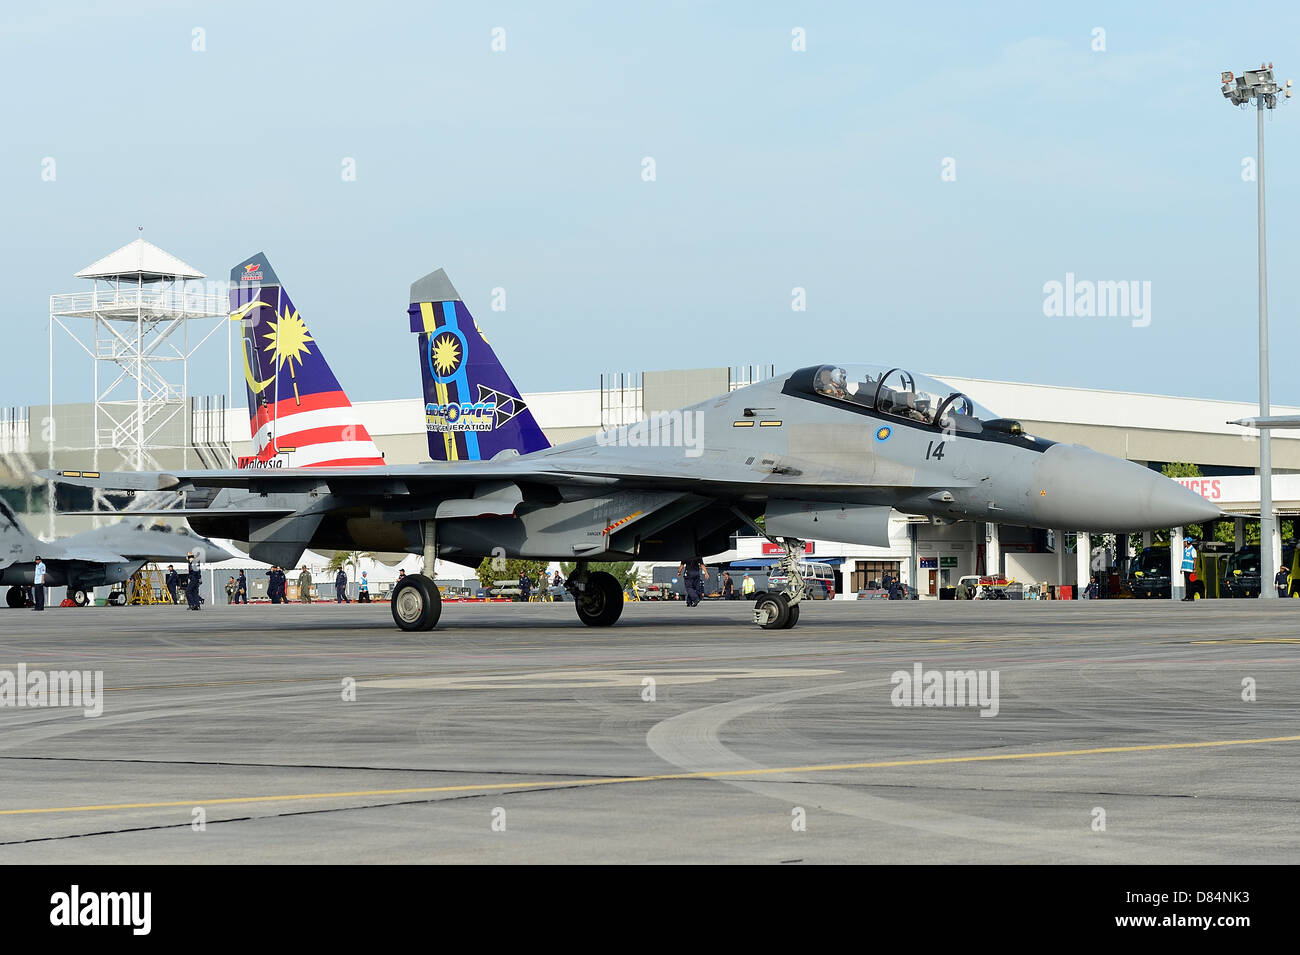 March 31, 2013 - A Sukhoi Su-30 (special colors) of the Royal Malaysian Air Force taxiing at Langkawi Airport, Malaysia. Stock Photo